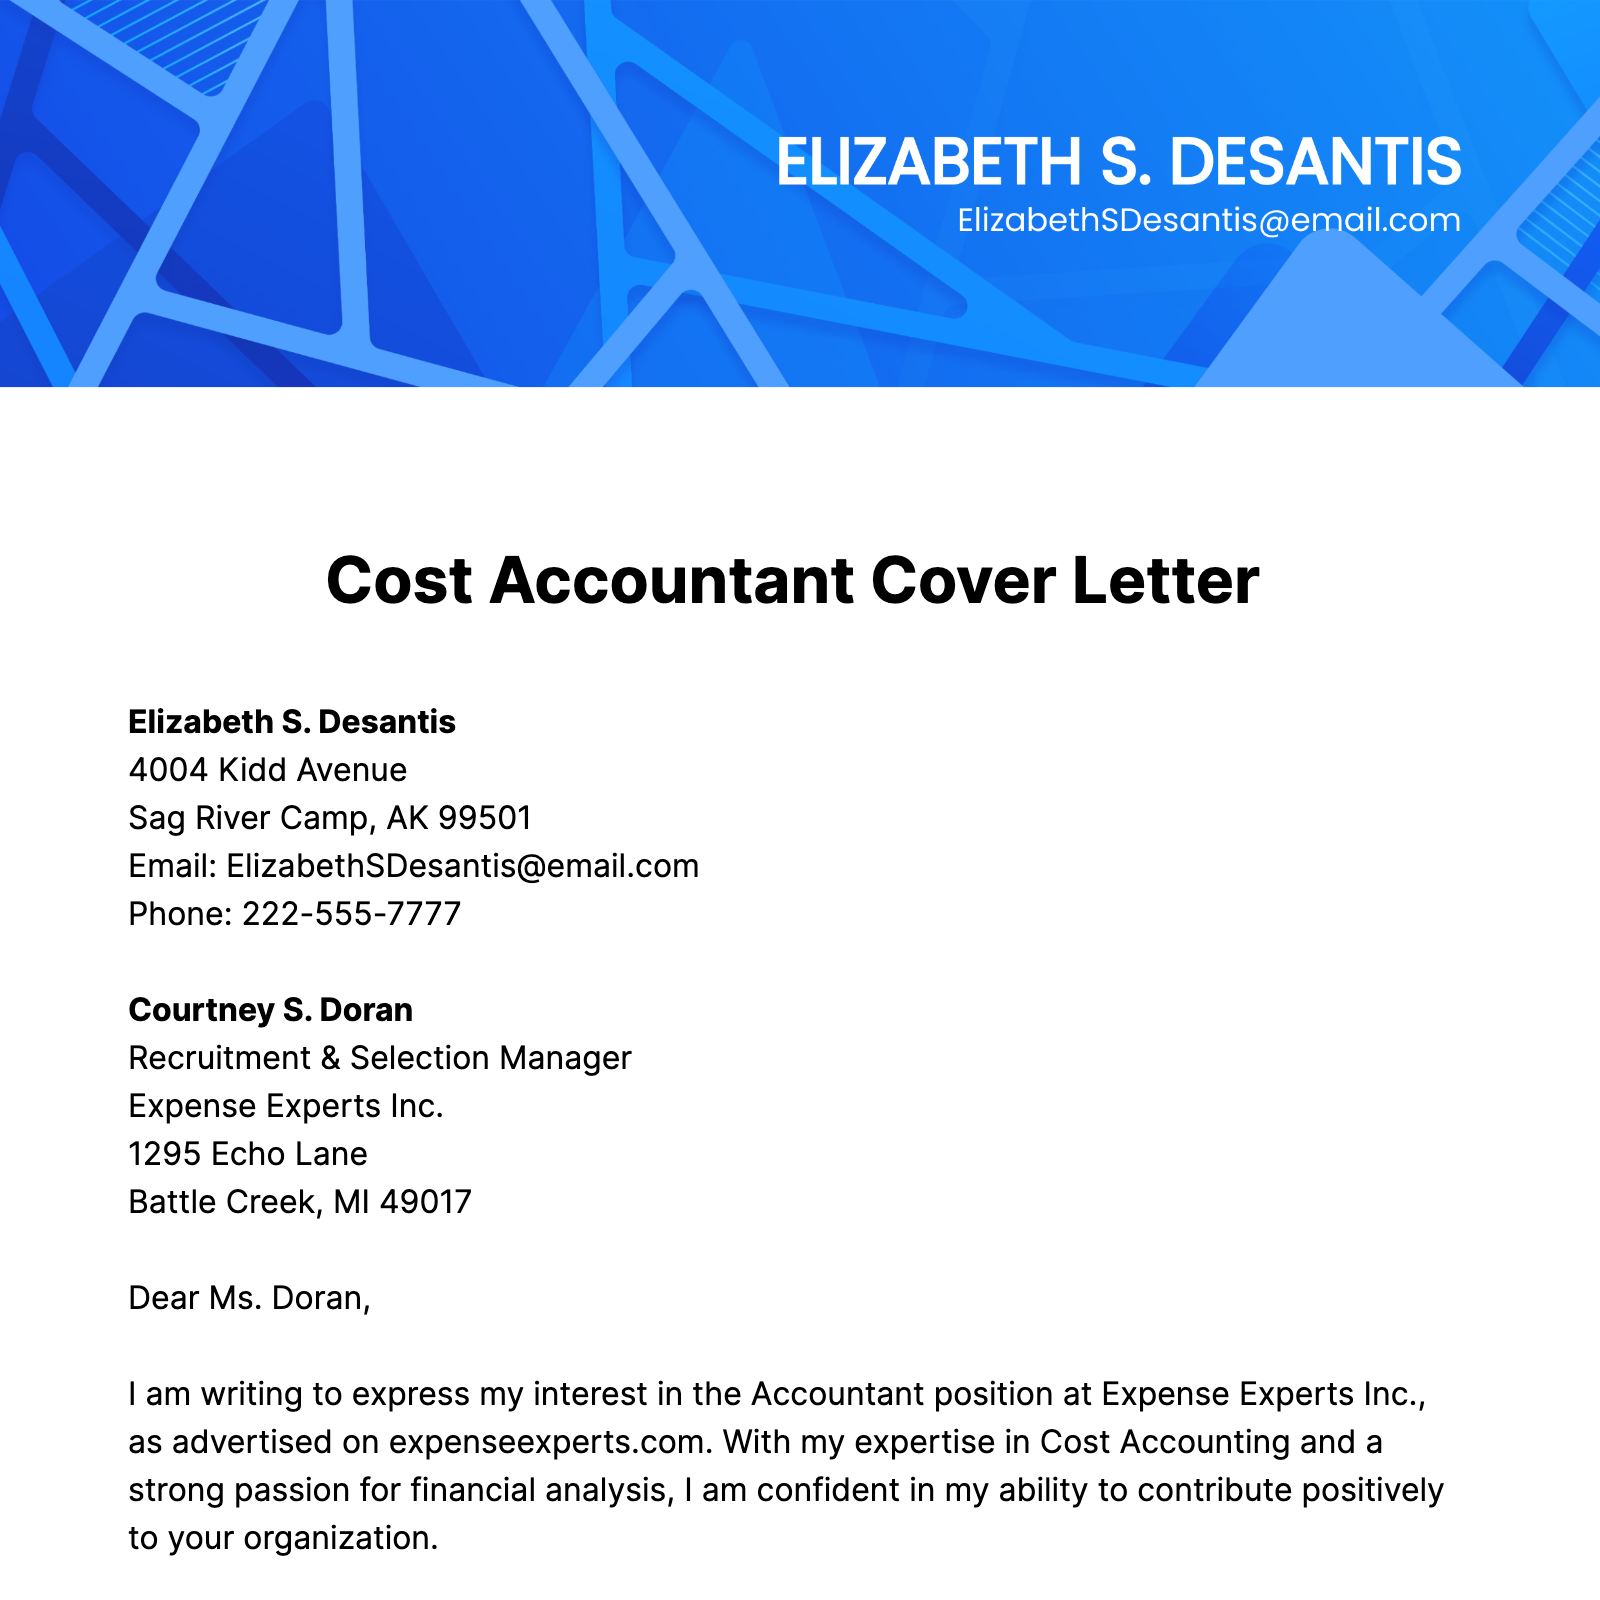 Cost Accountant Cover Letter Template